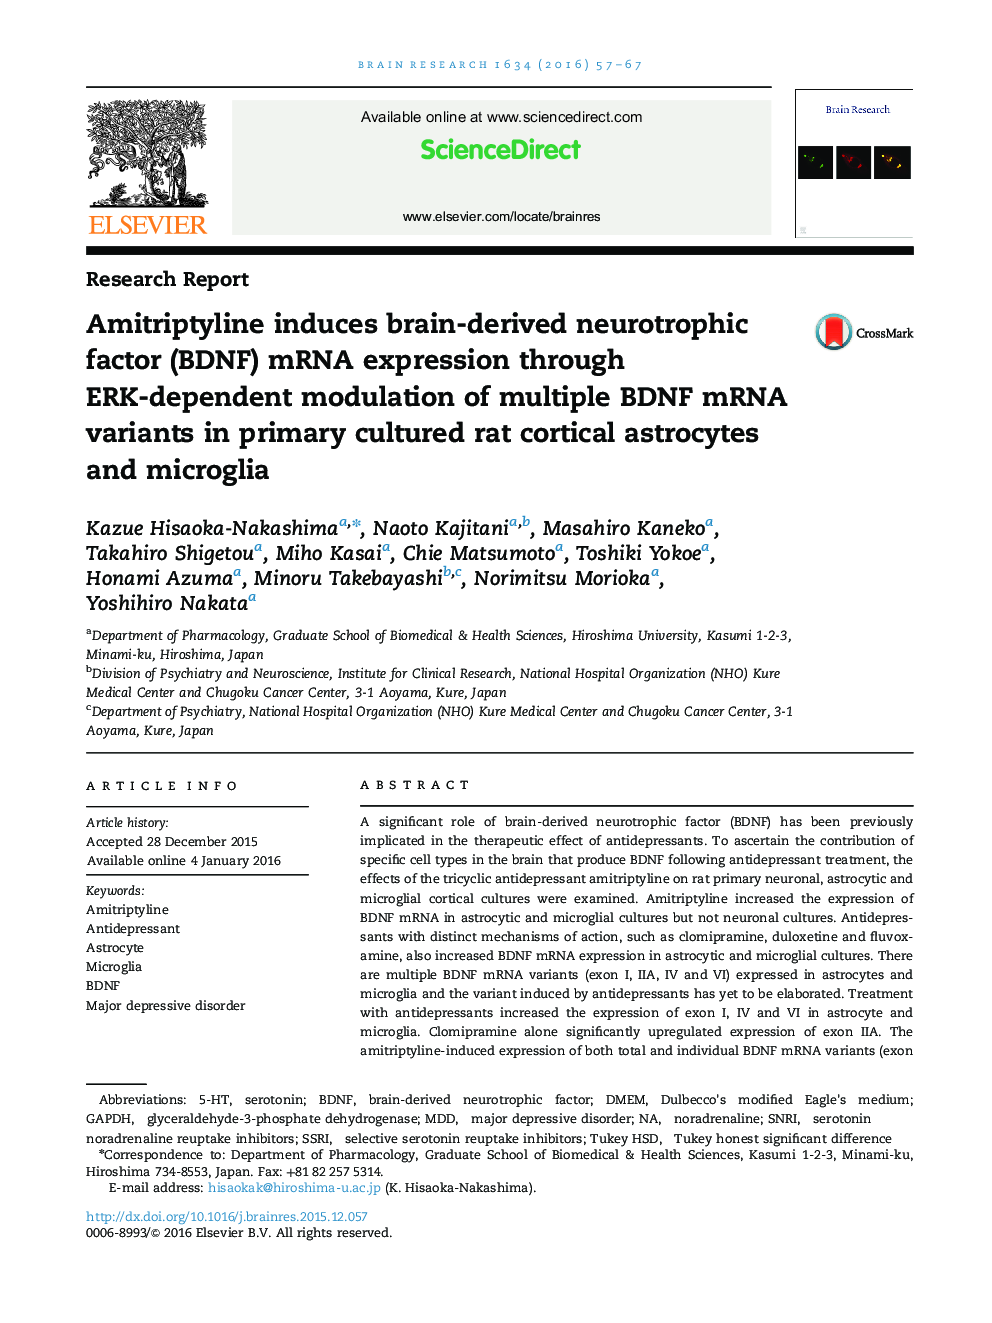 Amitriptyline induces brain-derived neurotrophic factor (BDNF) mRNA expression through ERK-dependent modulation of multiple BDNF mRNA variants in primary cultured rat cortical astrocytes and microglia